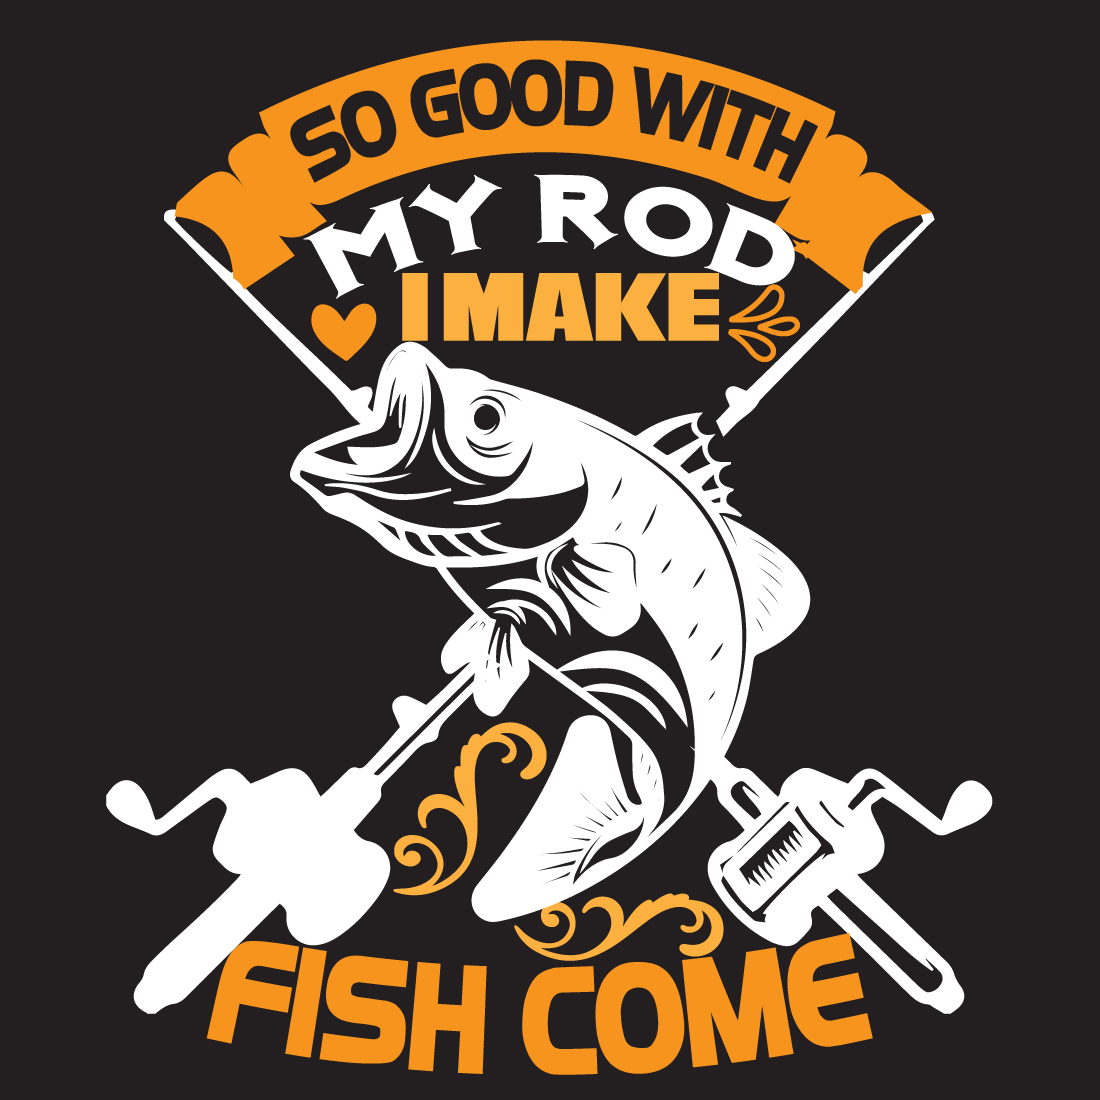 So good with i make fish come preview image.